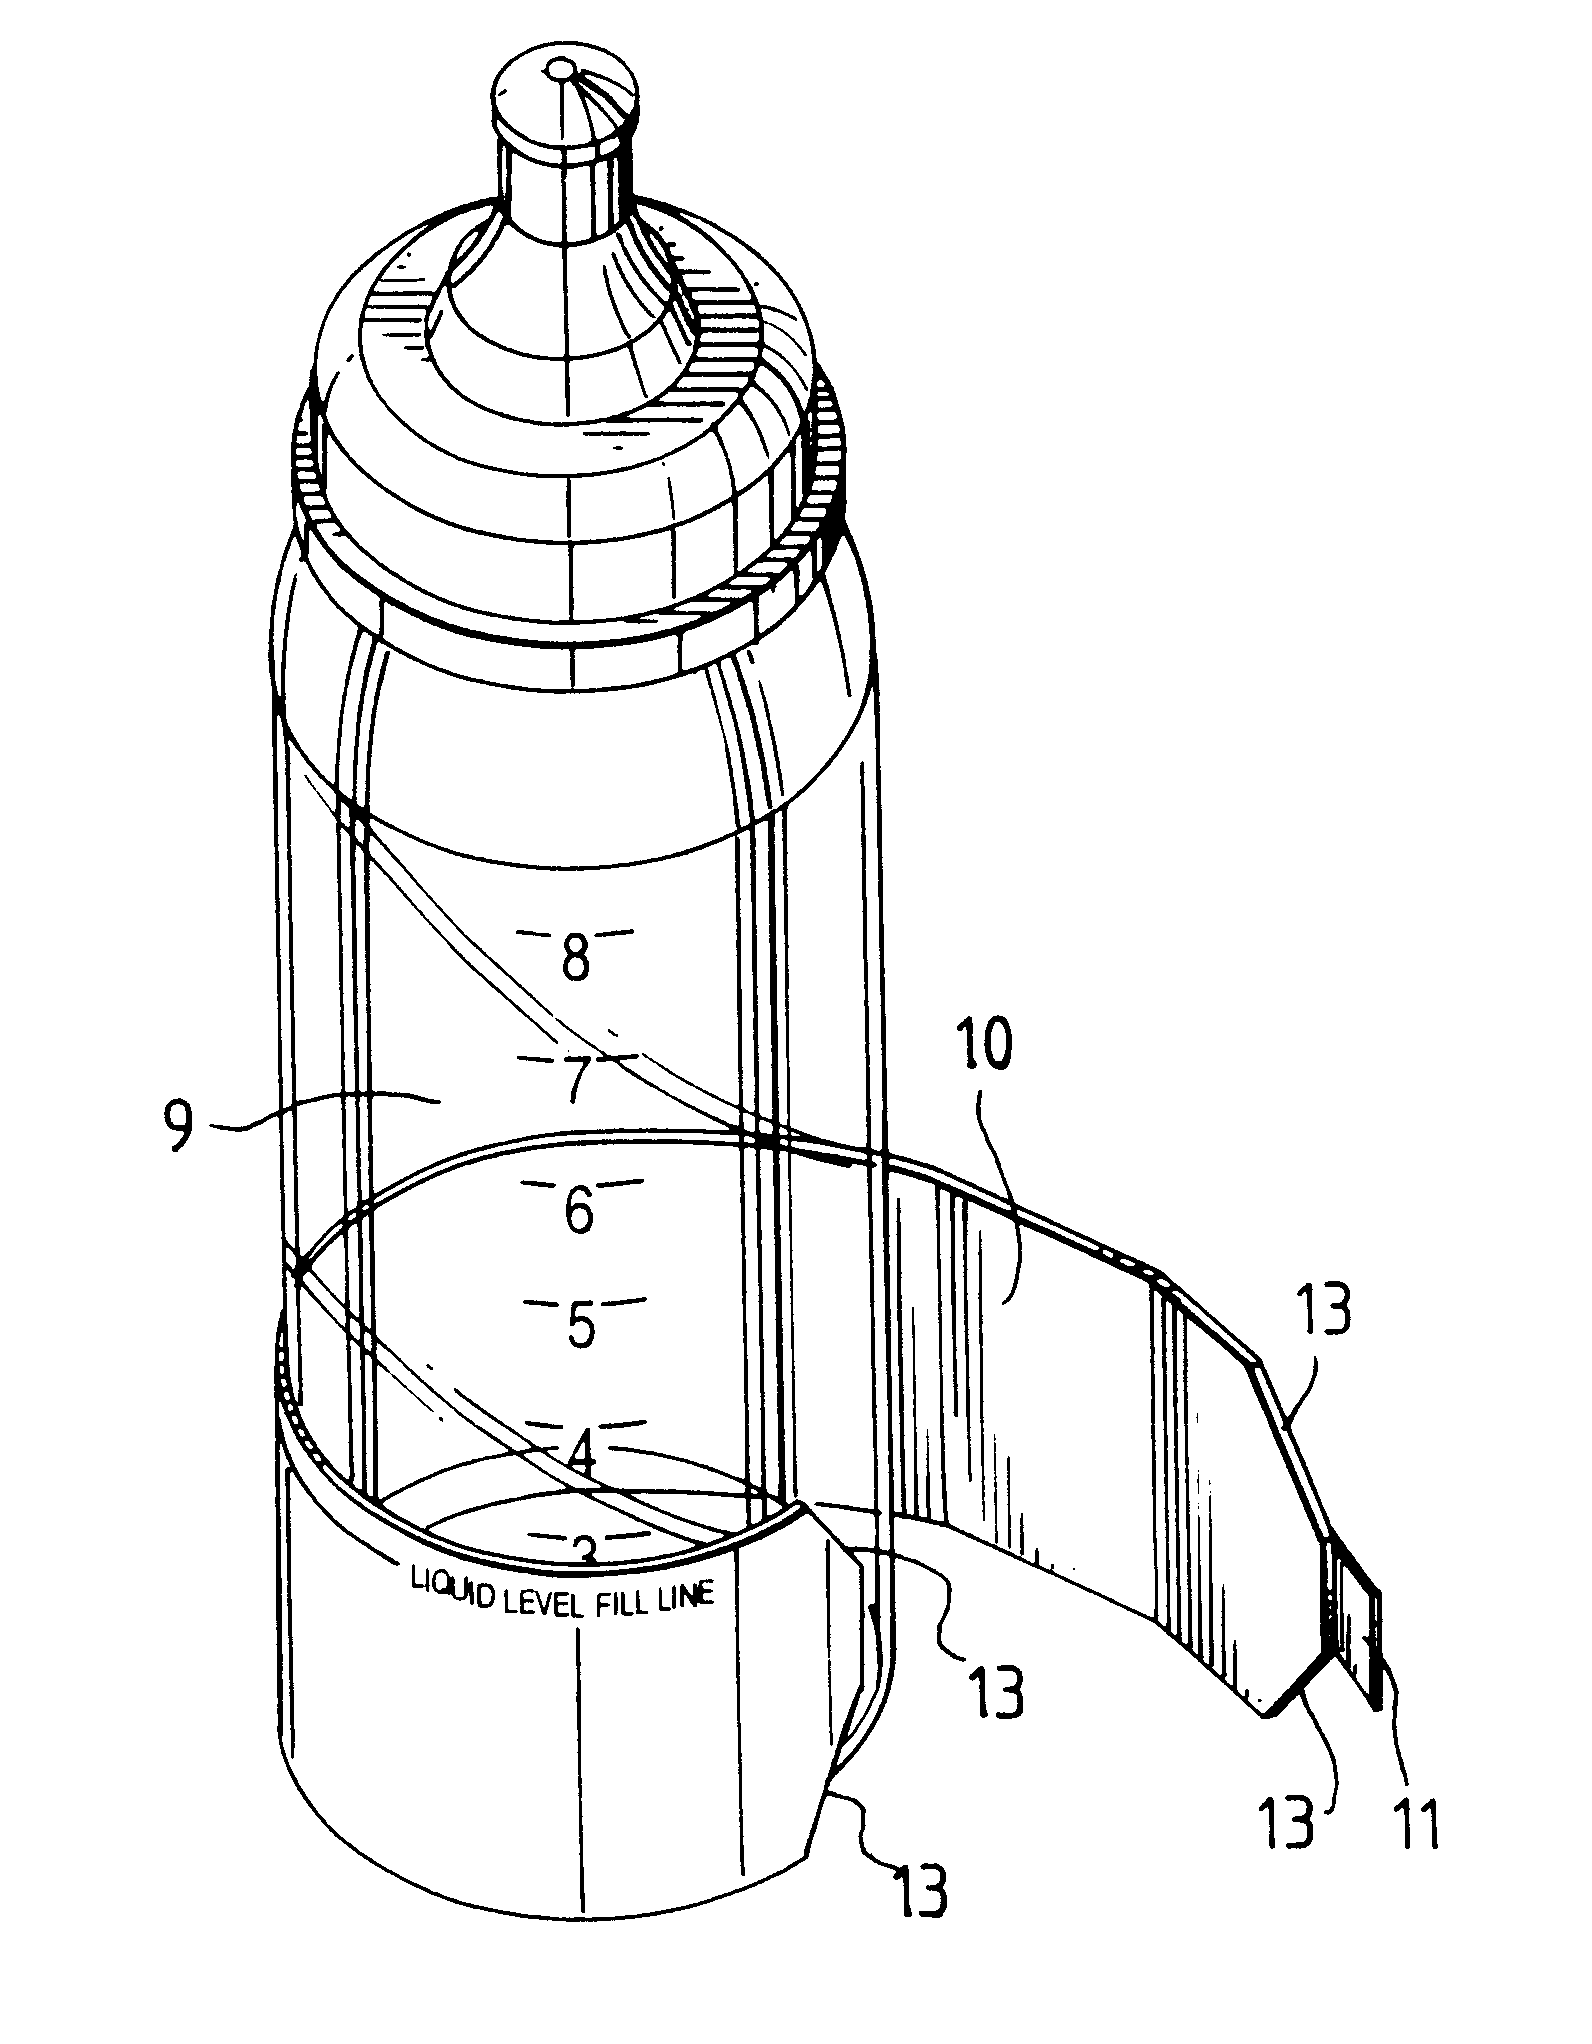 Shielding method for microwave heating of infant formula to a safe and uniform temperature